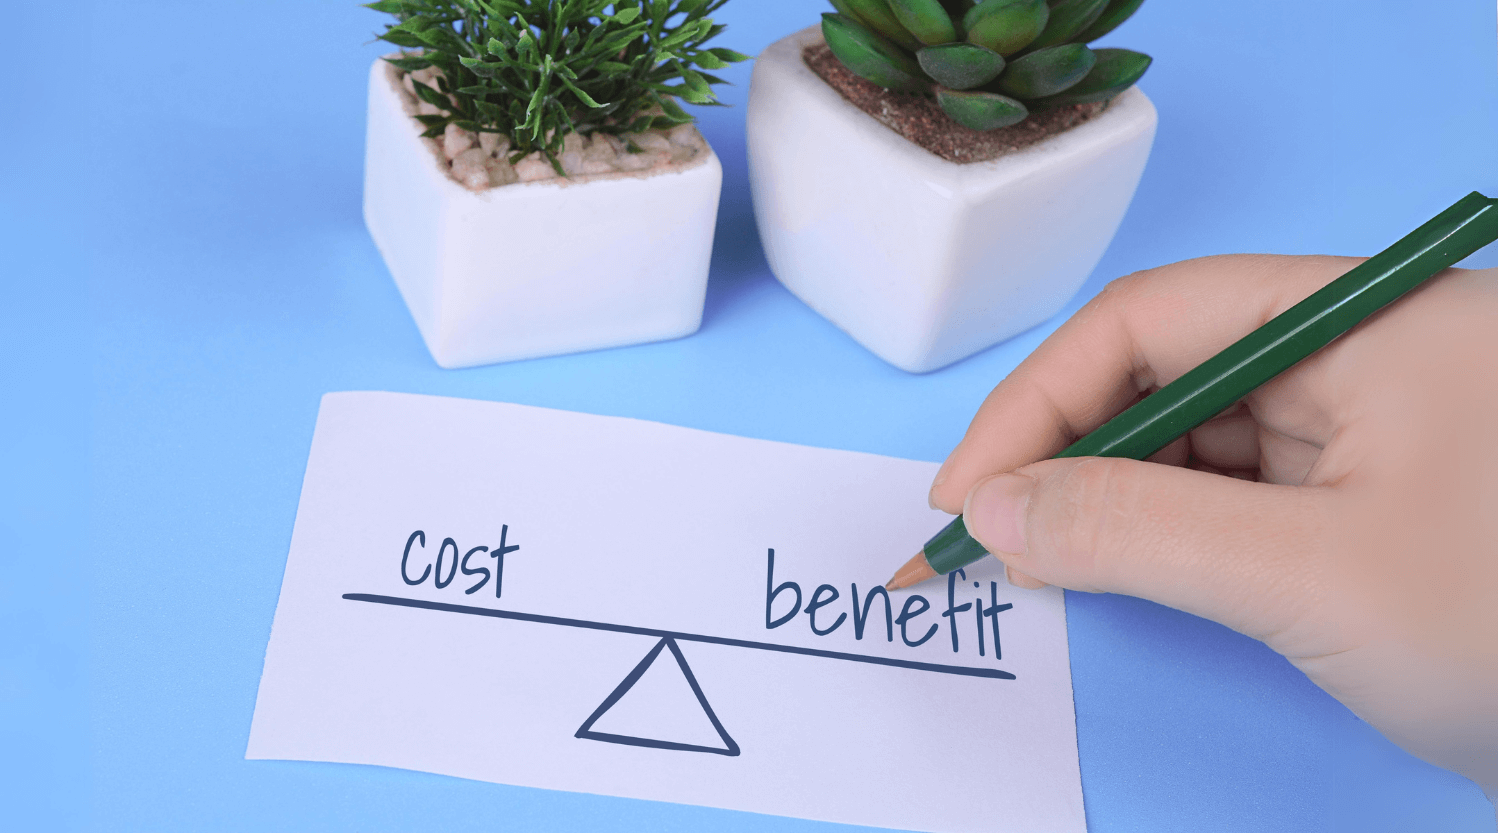 Evaluating the Costs and Benefits